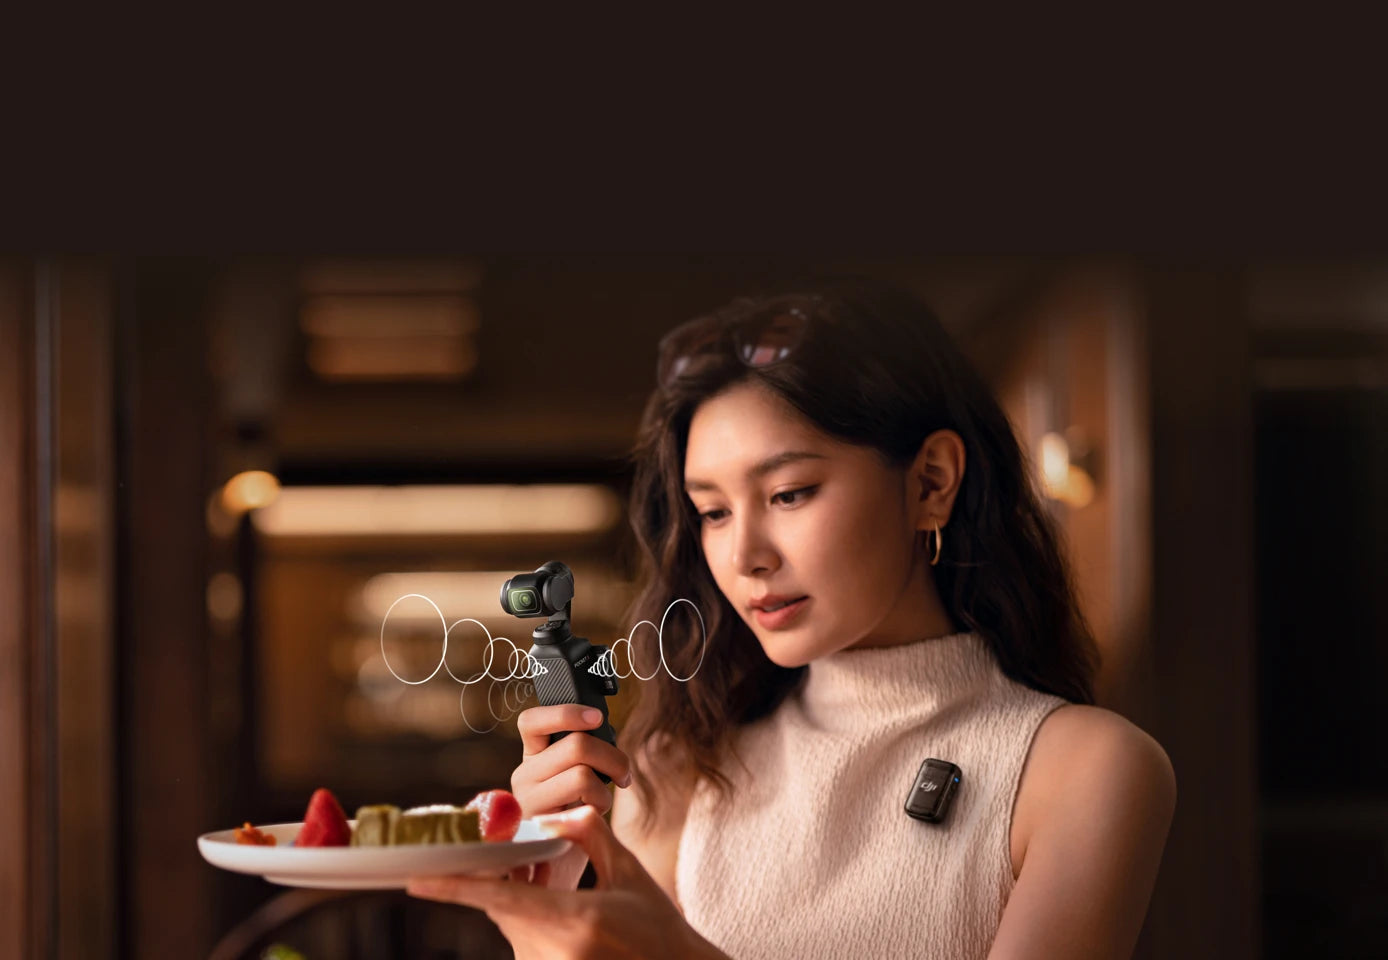 DJI Osmo Pocket 3, the upgraded 2-inch OLED screen delivers richer colors and higher contrast .